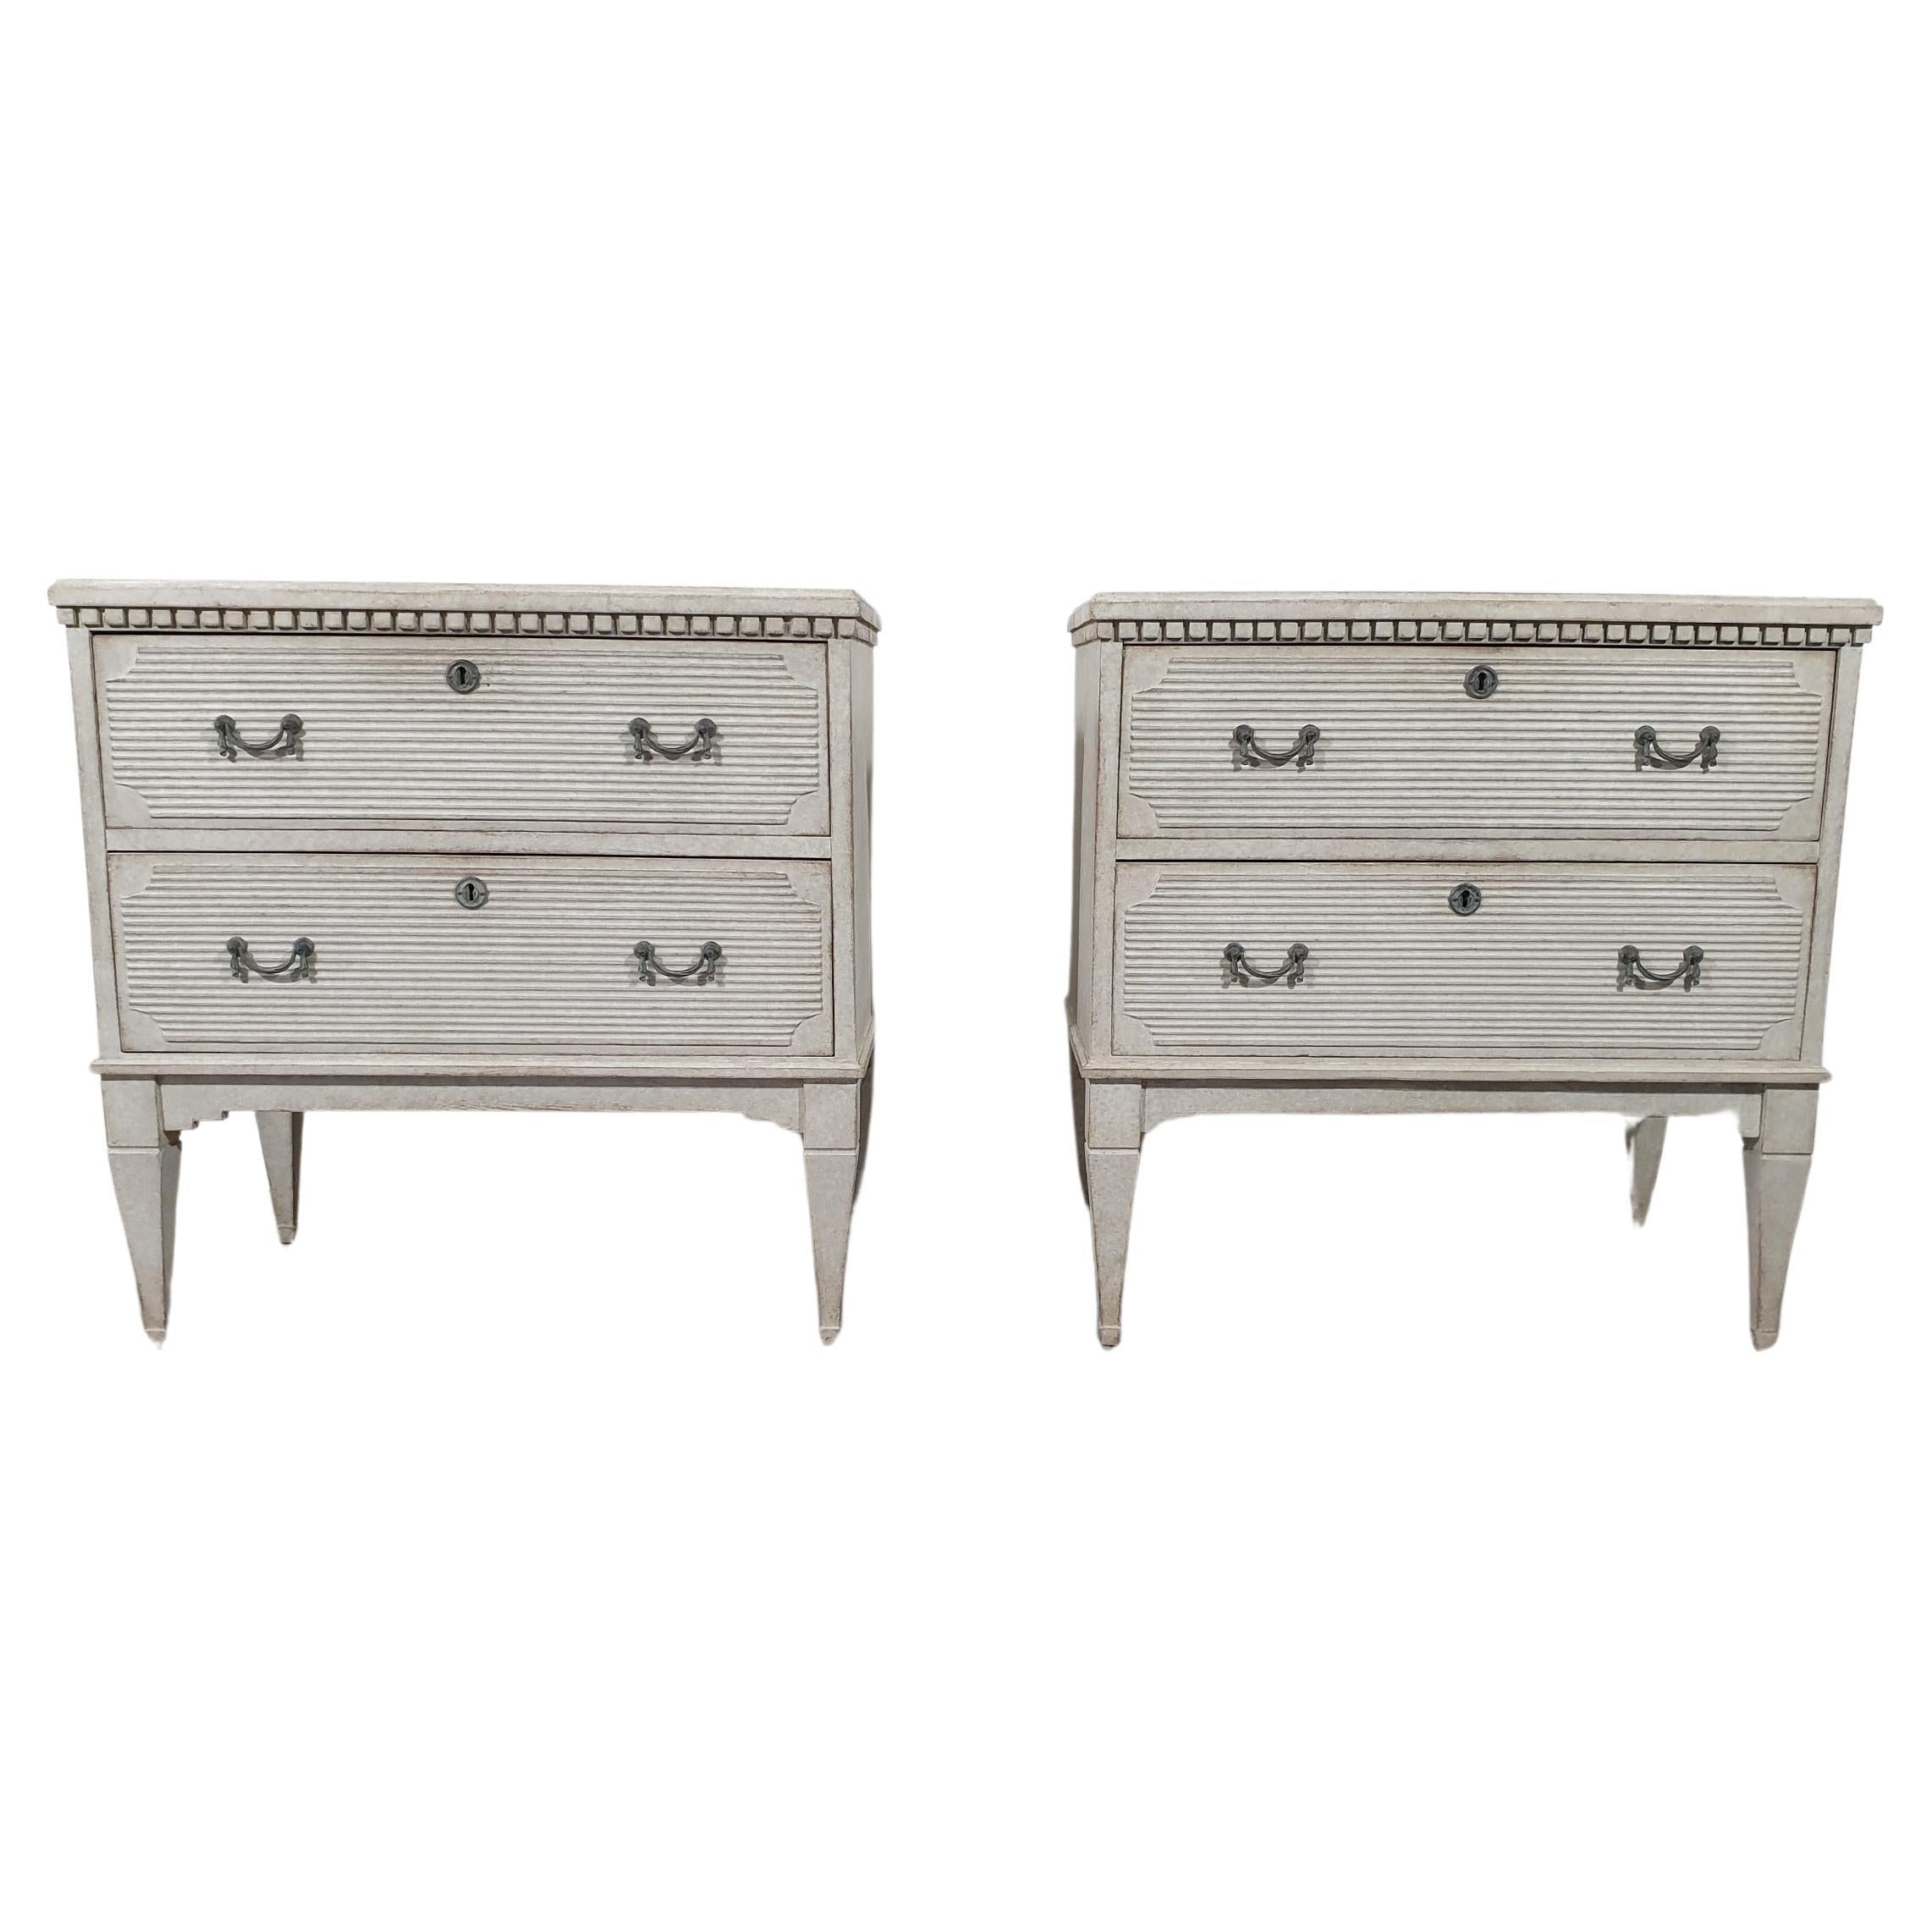 Swedish 1890s Gustavian Style Gray Painted Chests with Reeded Drawers, a Pair